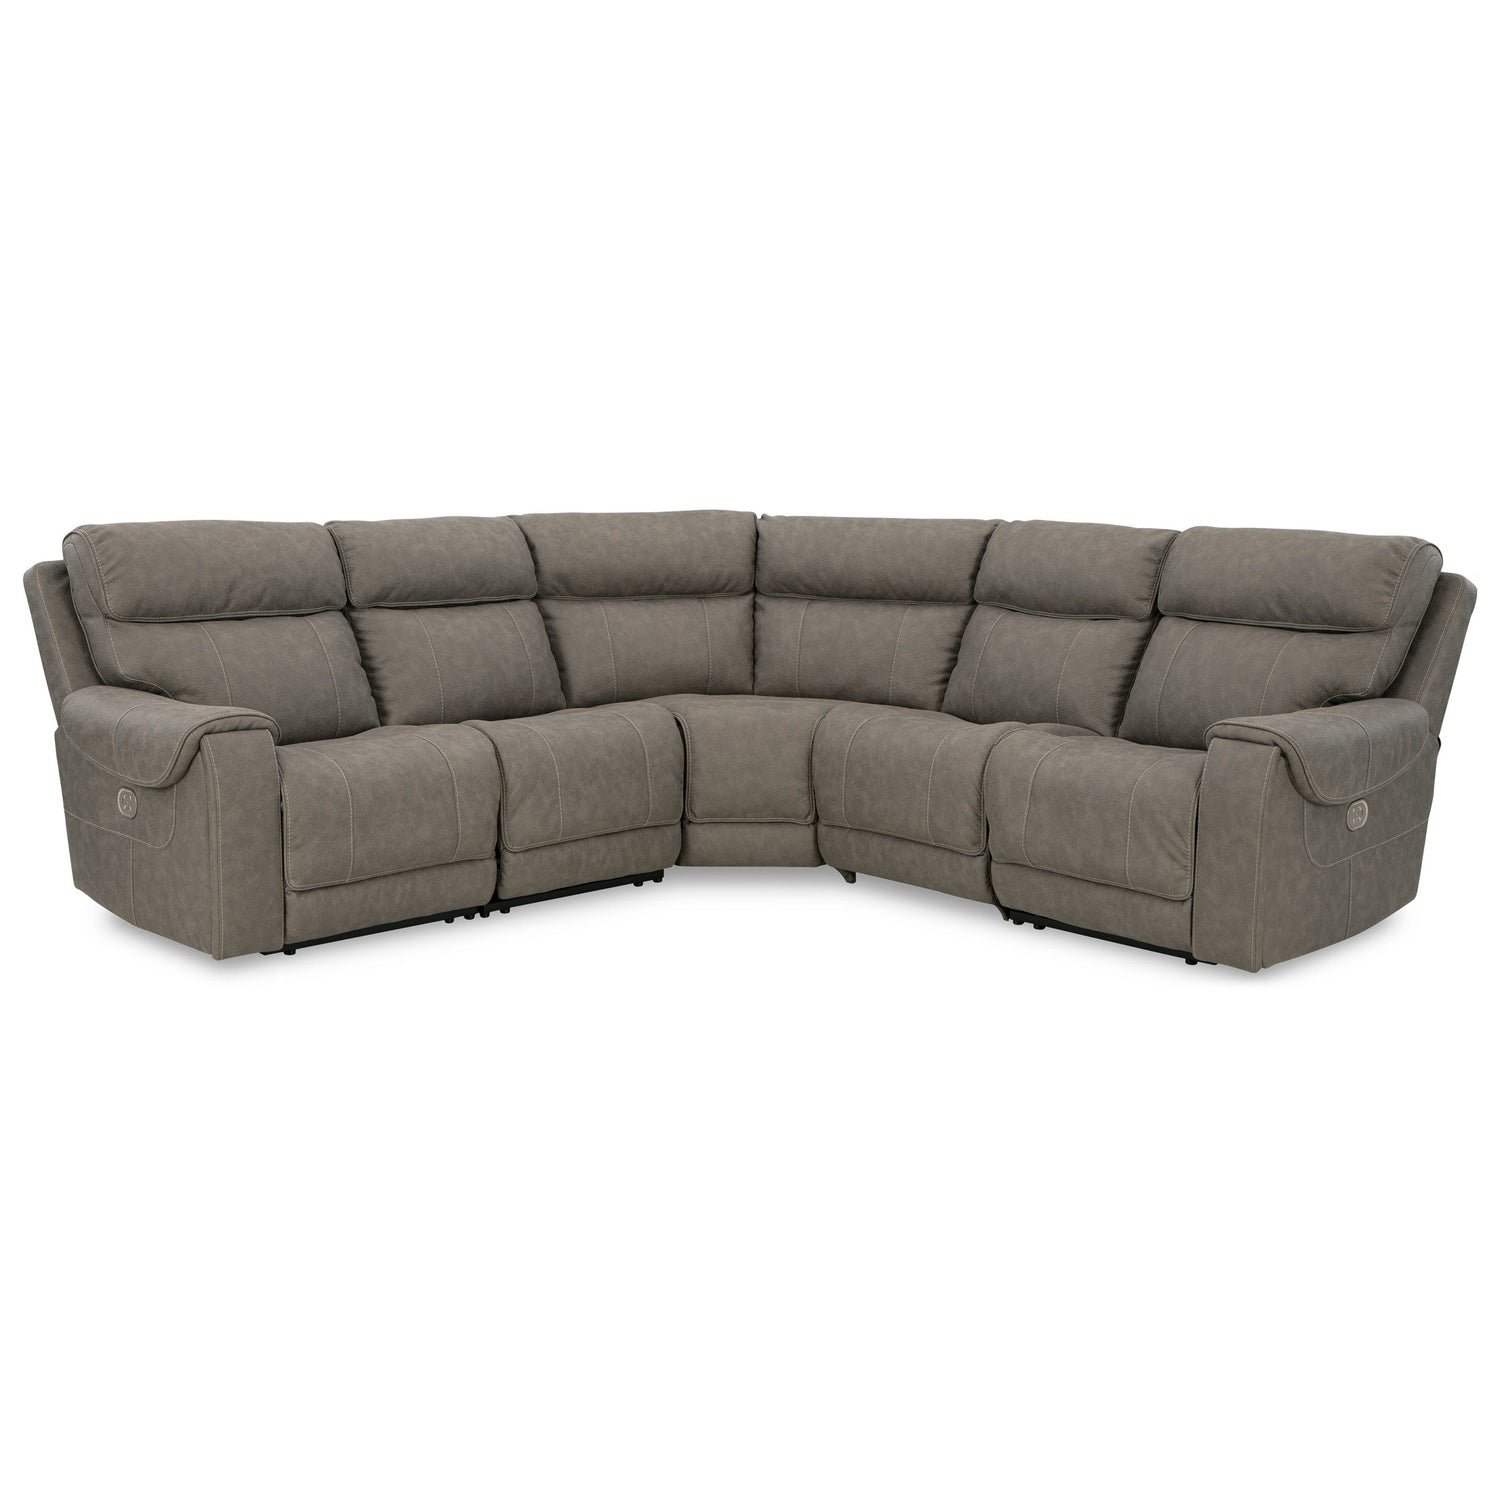 Starbot 5-Piece Power Reclining Sectional Ash-23501S4